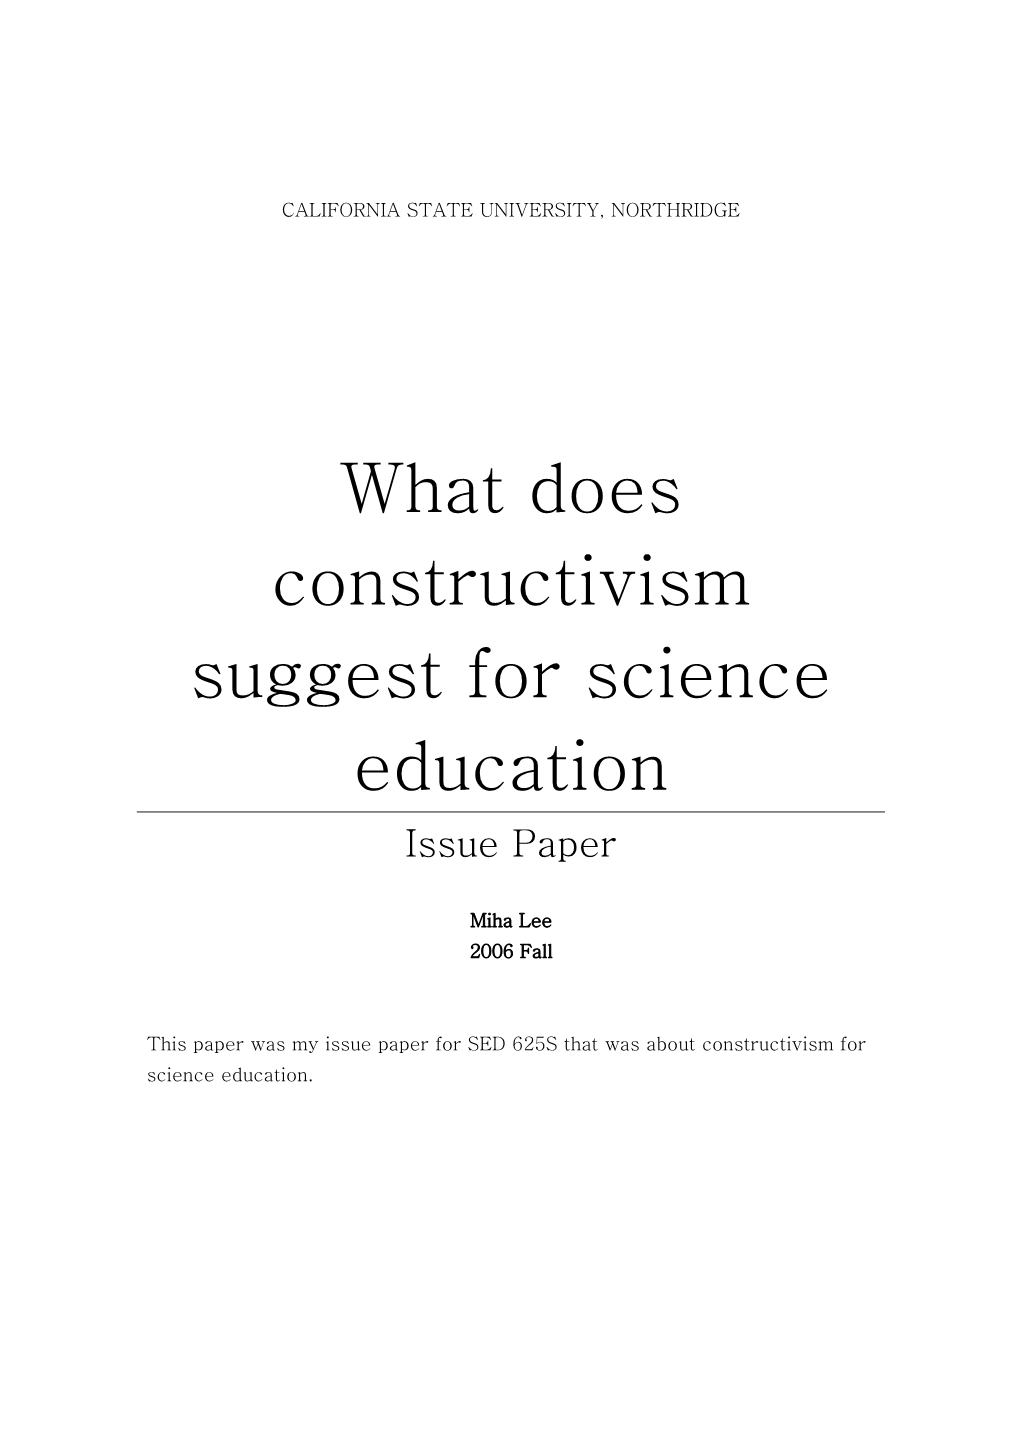 What Does Constructivism Suggest for Science Education